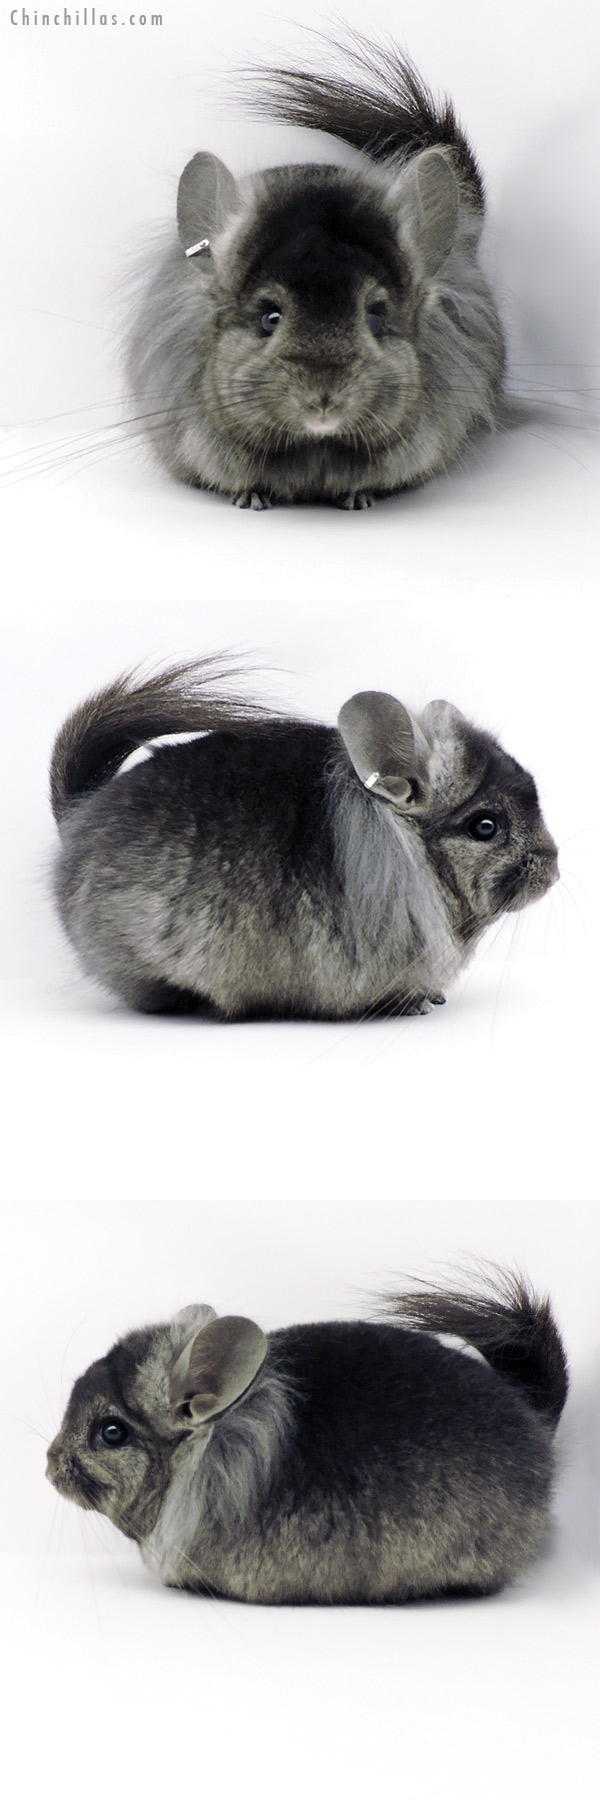 Chinchilla or related item offered for sale or export on Chinchillas.com - 19337 Ebony ( Locken Carrier ) G2  Royal Persian Angora Male Chinchilla